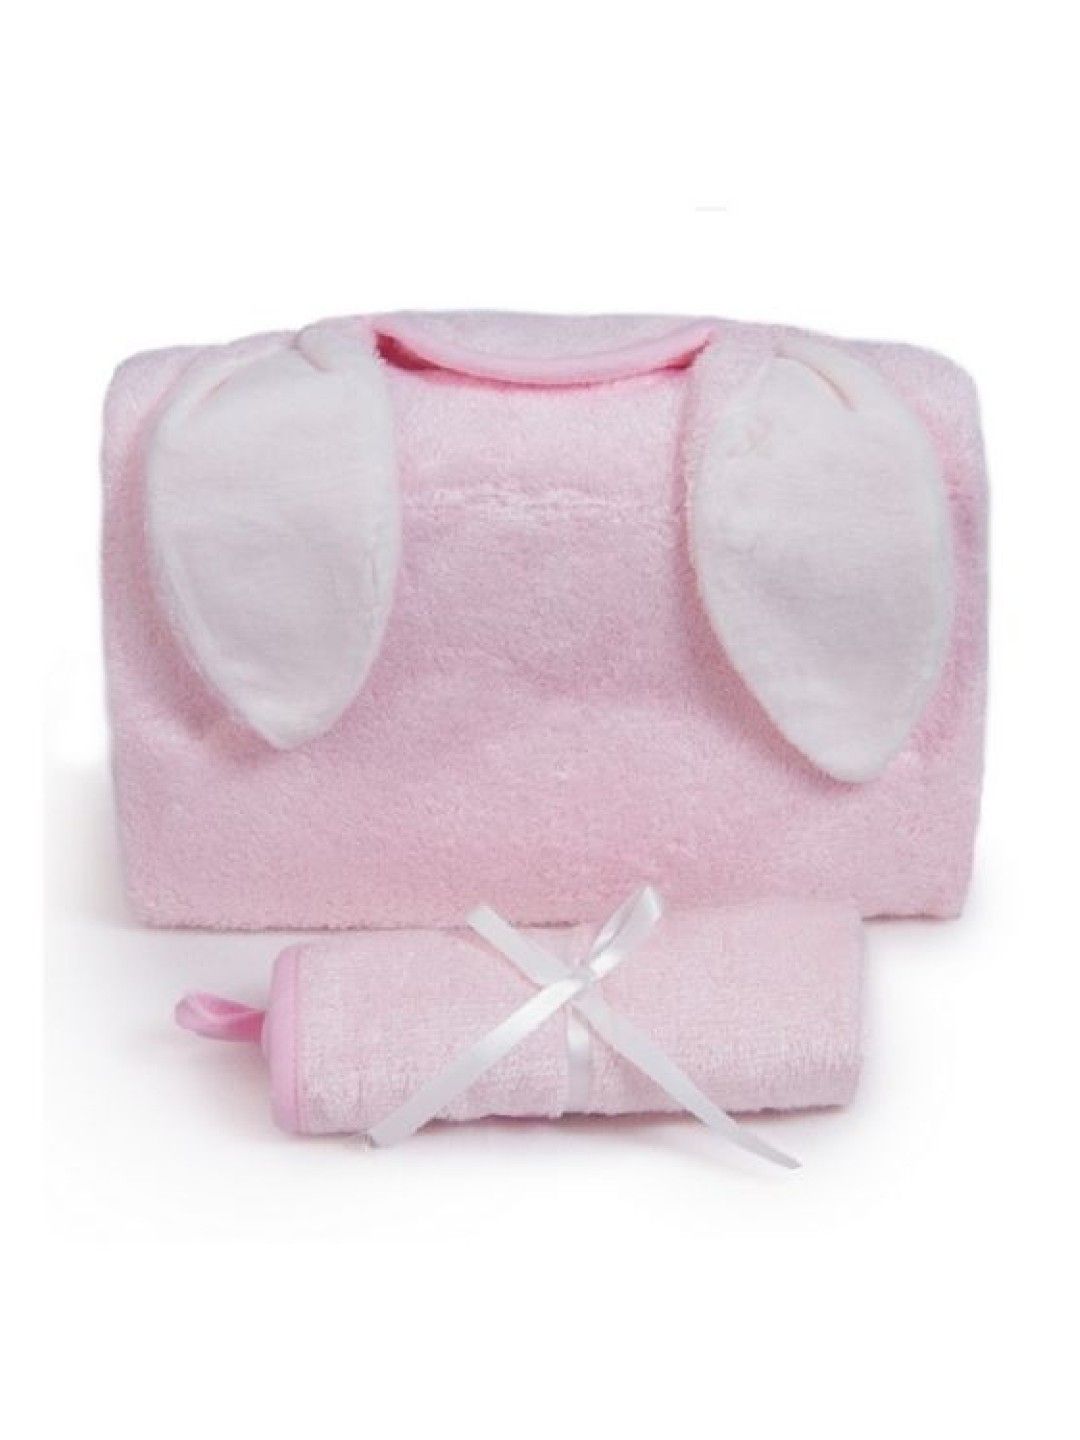 Nuborn Baby Essentials Bamboo Hooded Towel with Washcloth Set